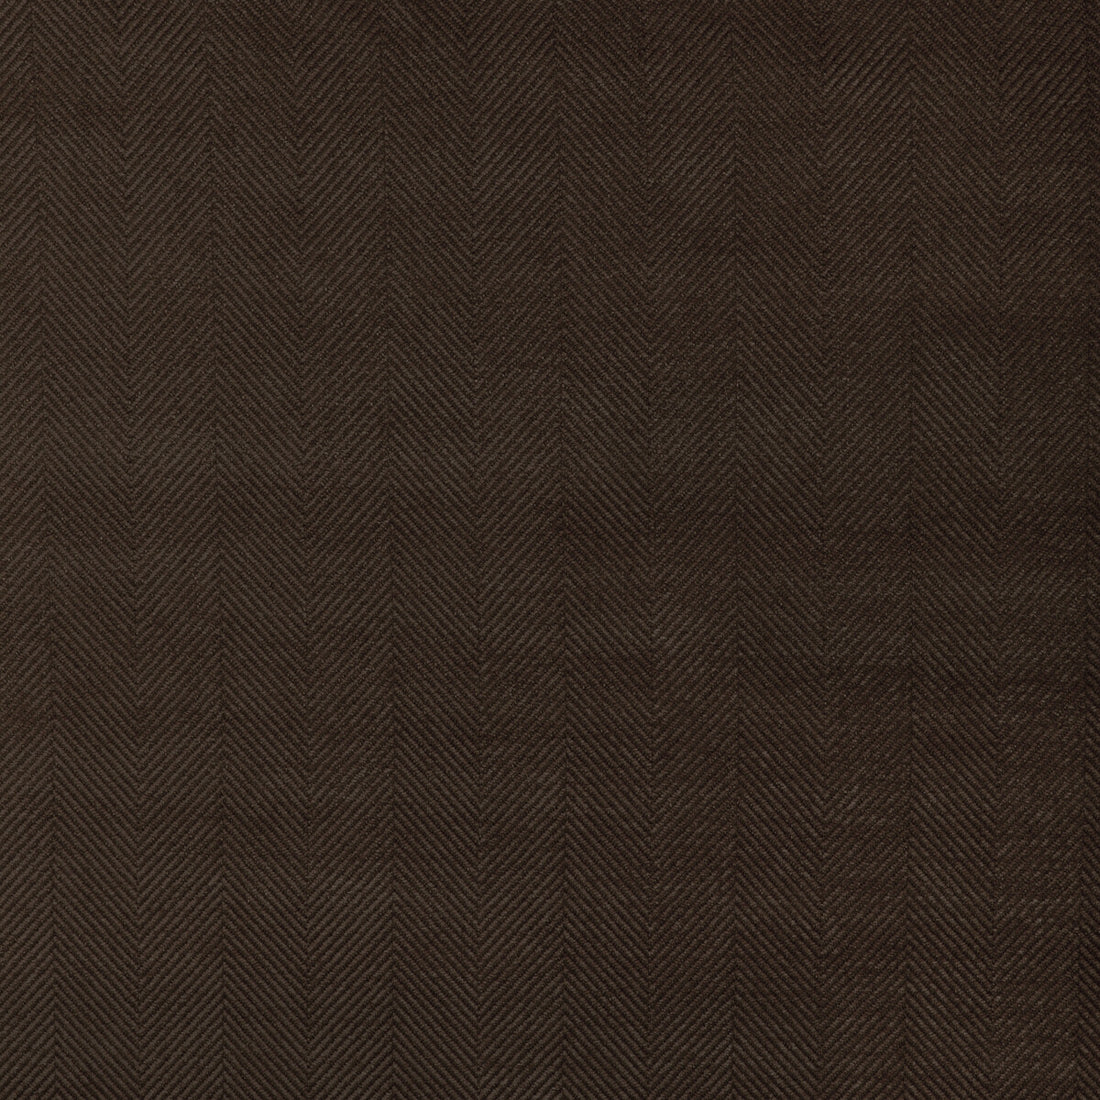 Rhone Weave fabric in brown color - pattern 8023133.6.0 - by Brunschwig &amp; Fils in the Arles Weaves collection